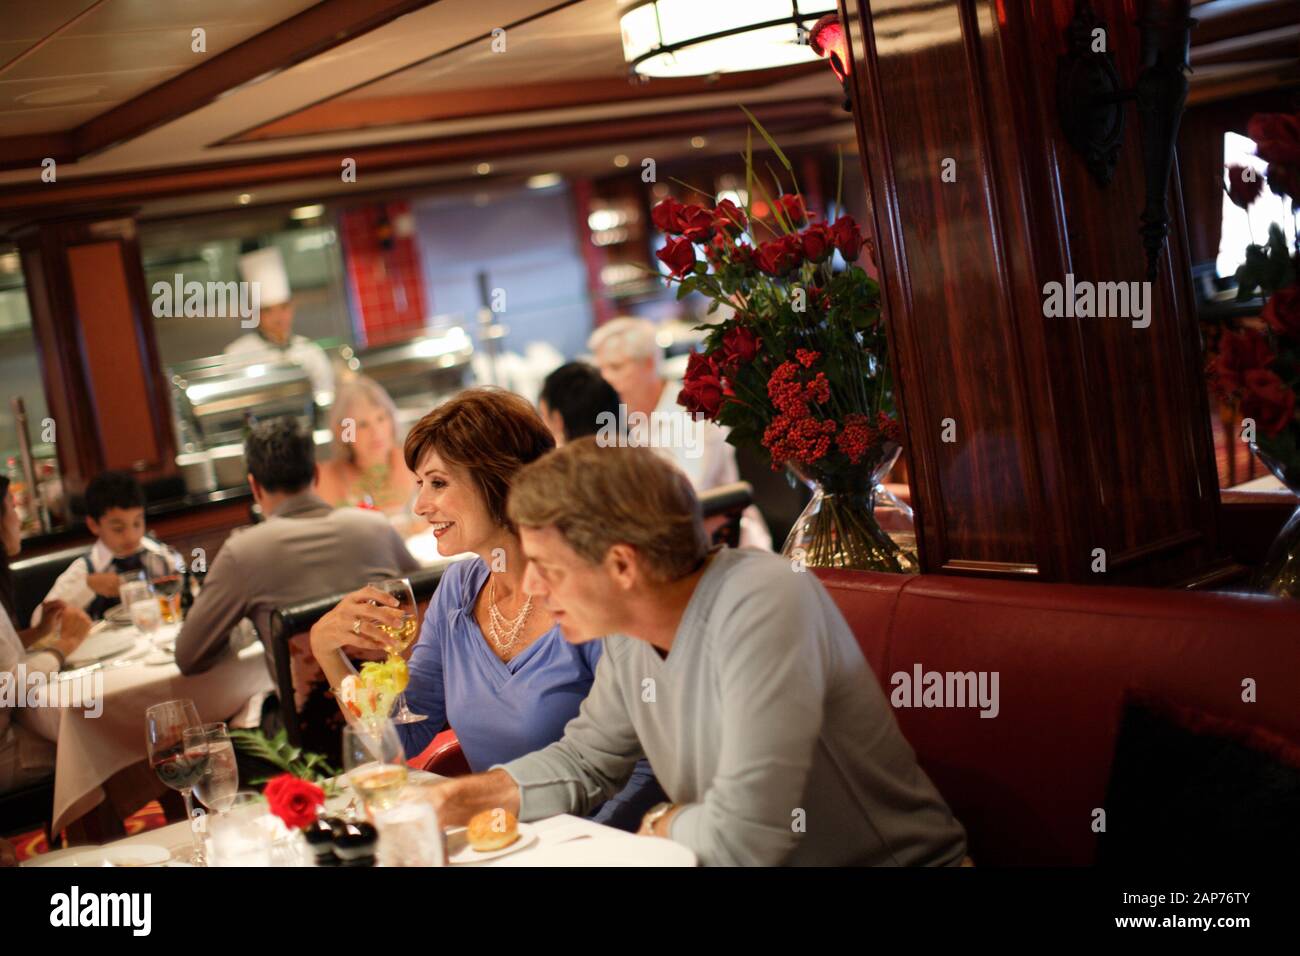 Two mid adults enjoying dinner in a full dining room at a restaurant. Stock Photo